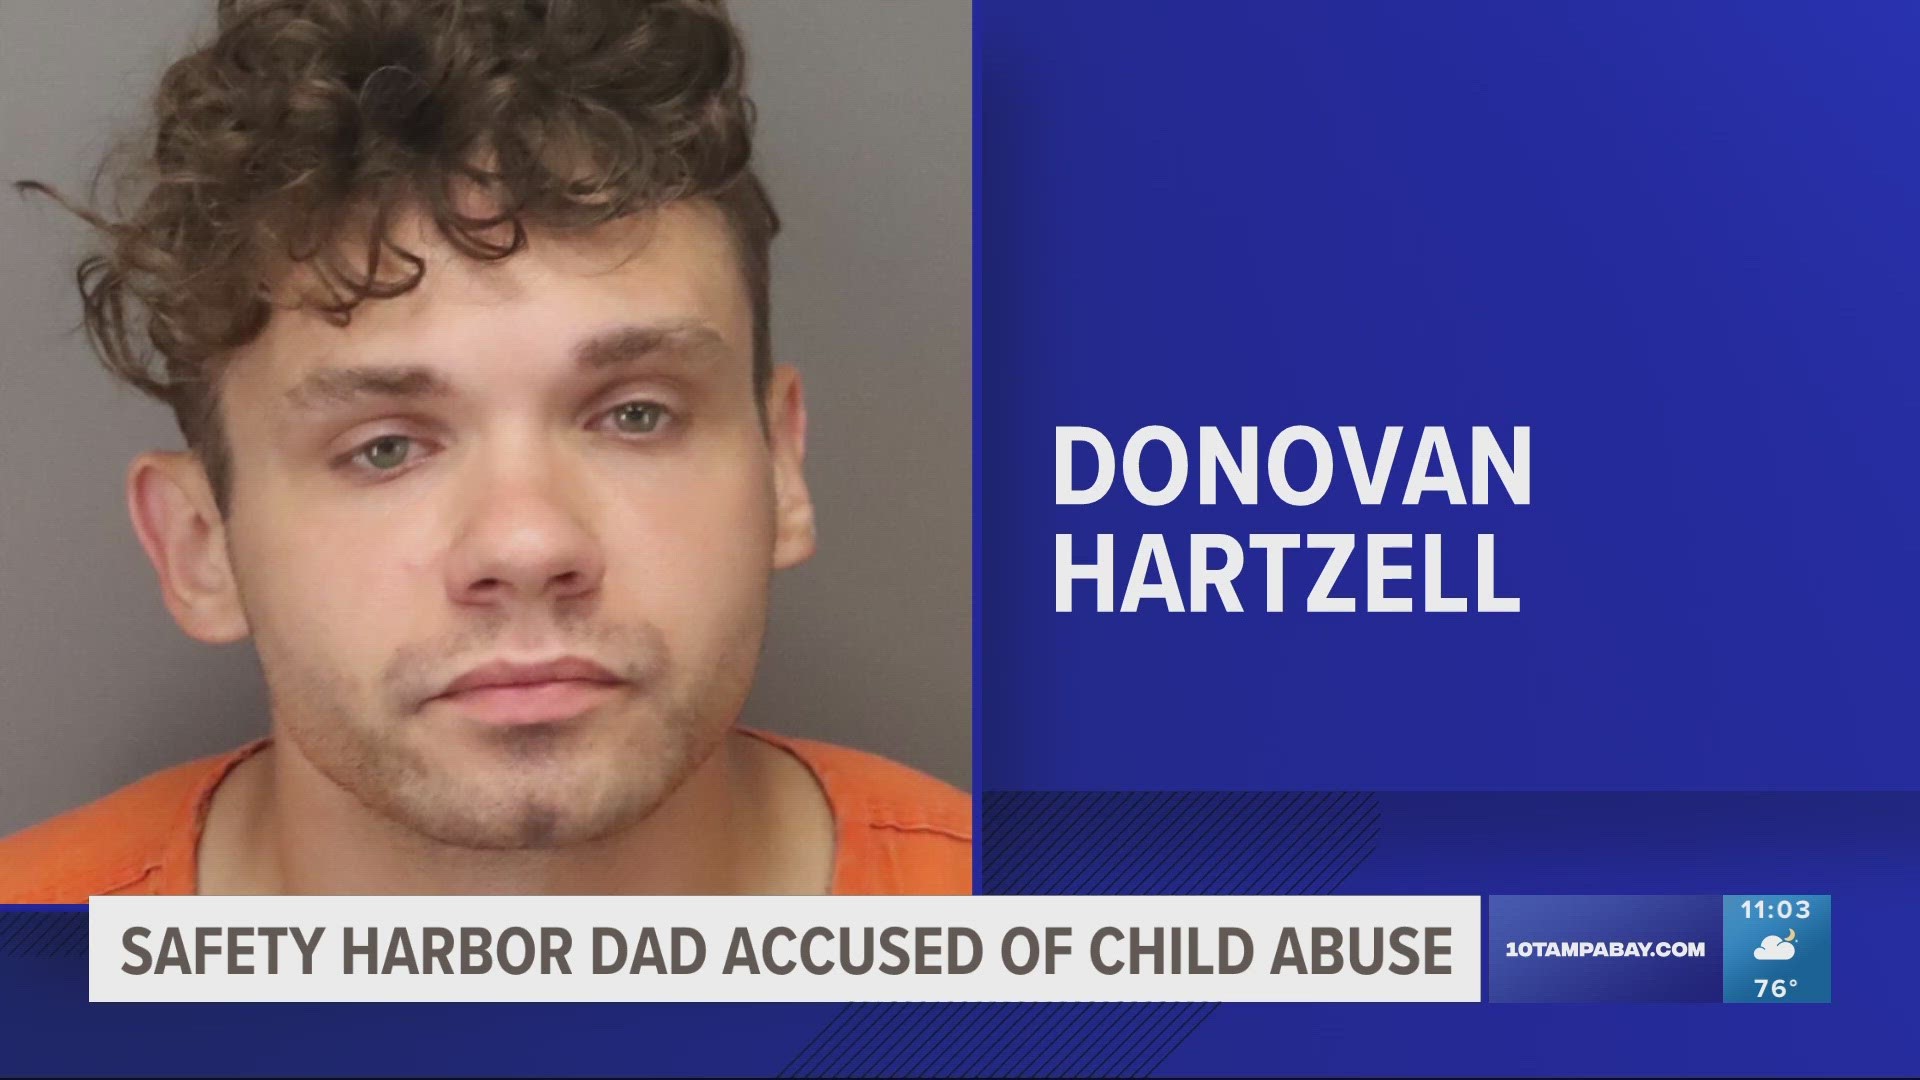 Donovan Hartzell, 26, was arrested and charged with child abuse.